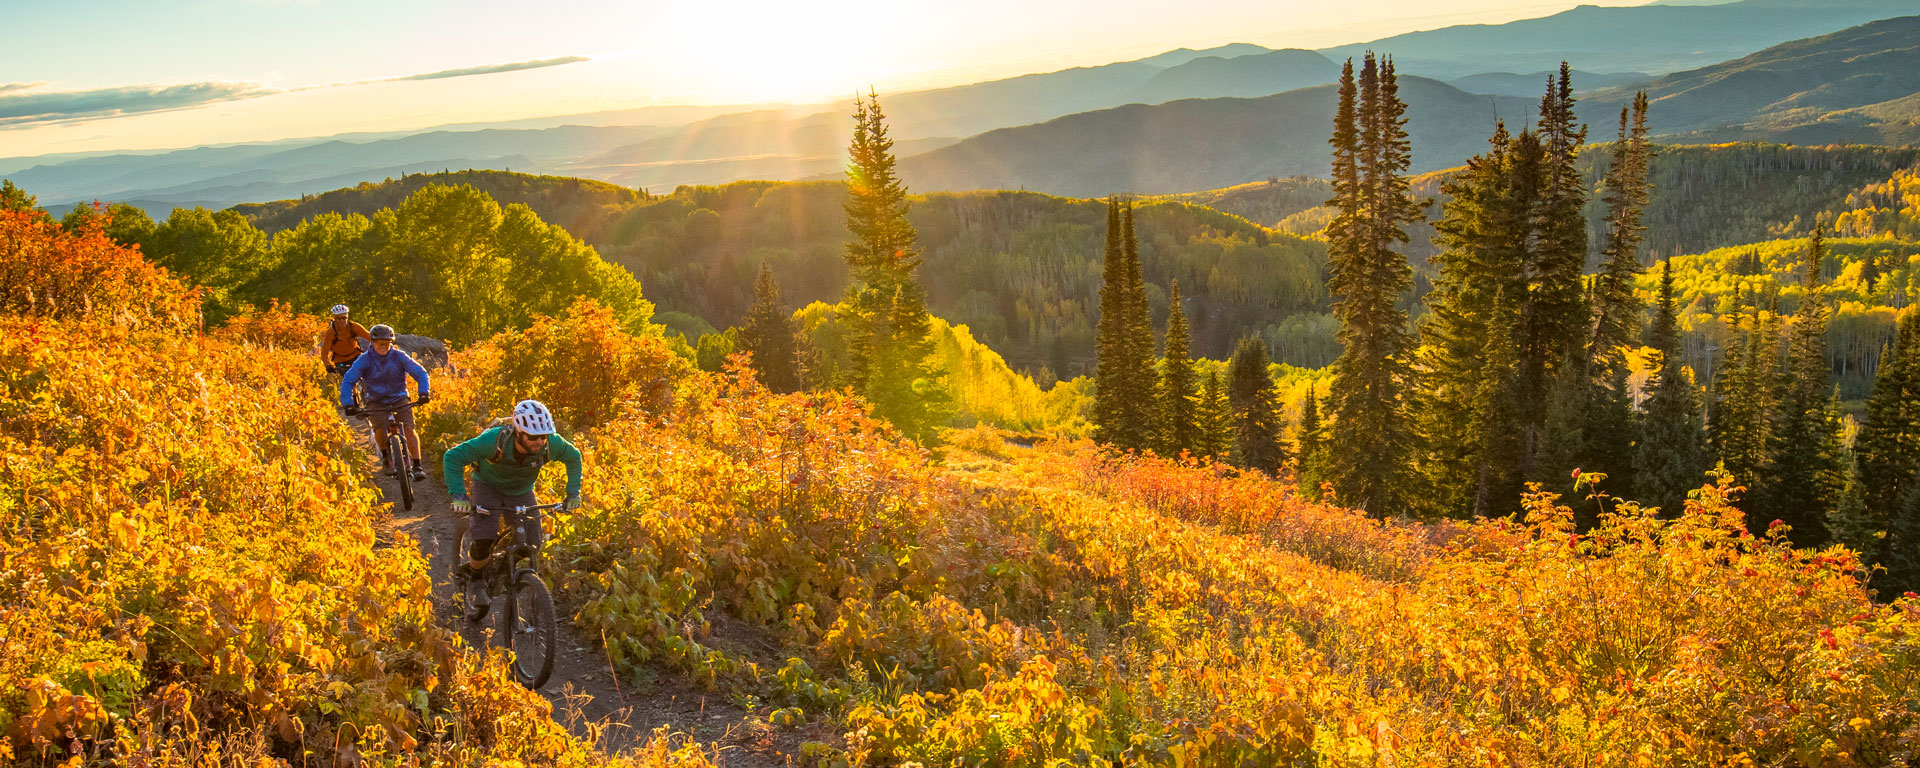 Mountain Biking on the Flash of Gold trail in Steamboat Springs, Colorado